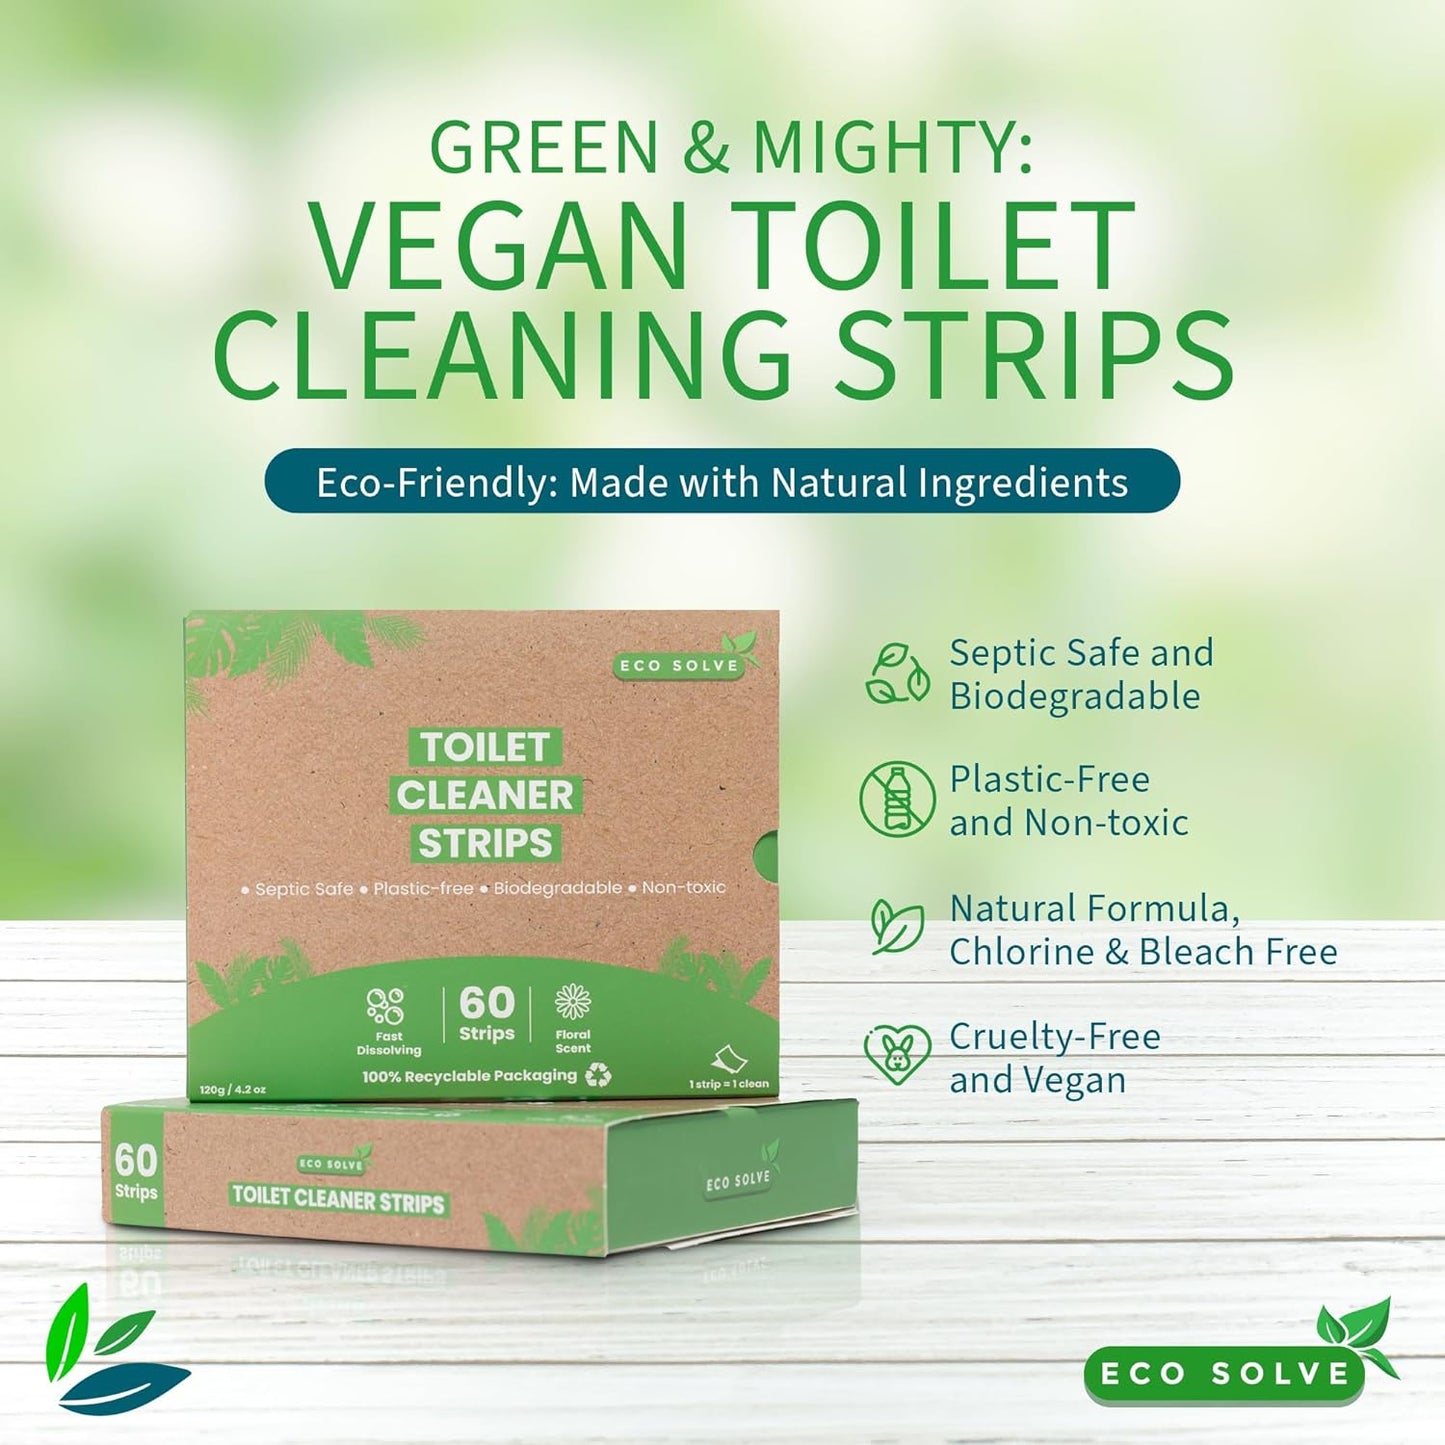 Toilet Bowl Cleaner Strips 60 Count, Eco-Friendly, Non-Toxic, Septic Safe, Removes Odors & Stains, Plastic-Free, Natural Toilet Bowl Cleaner for Quick and Easy Cleaning, Toilet Fresheners